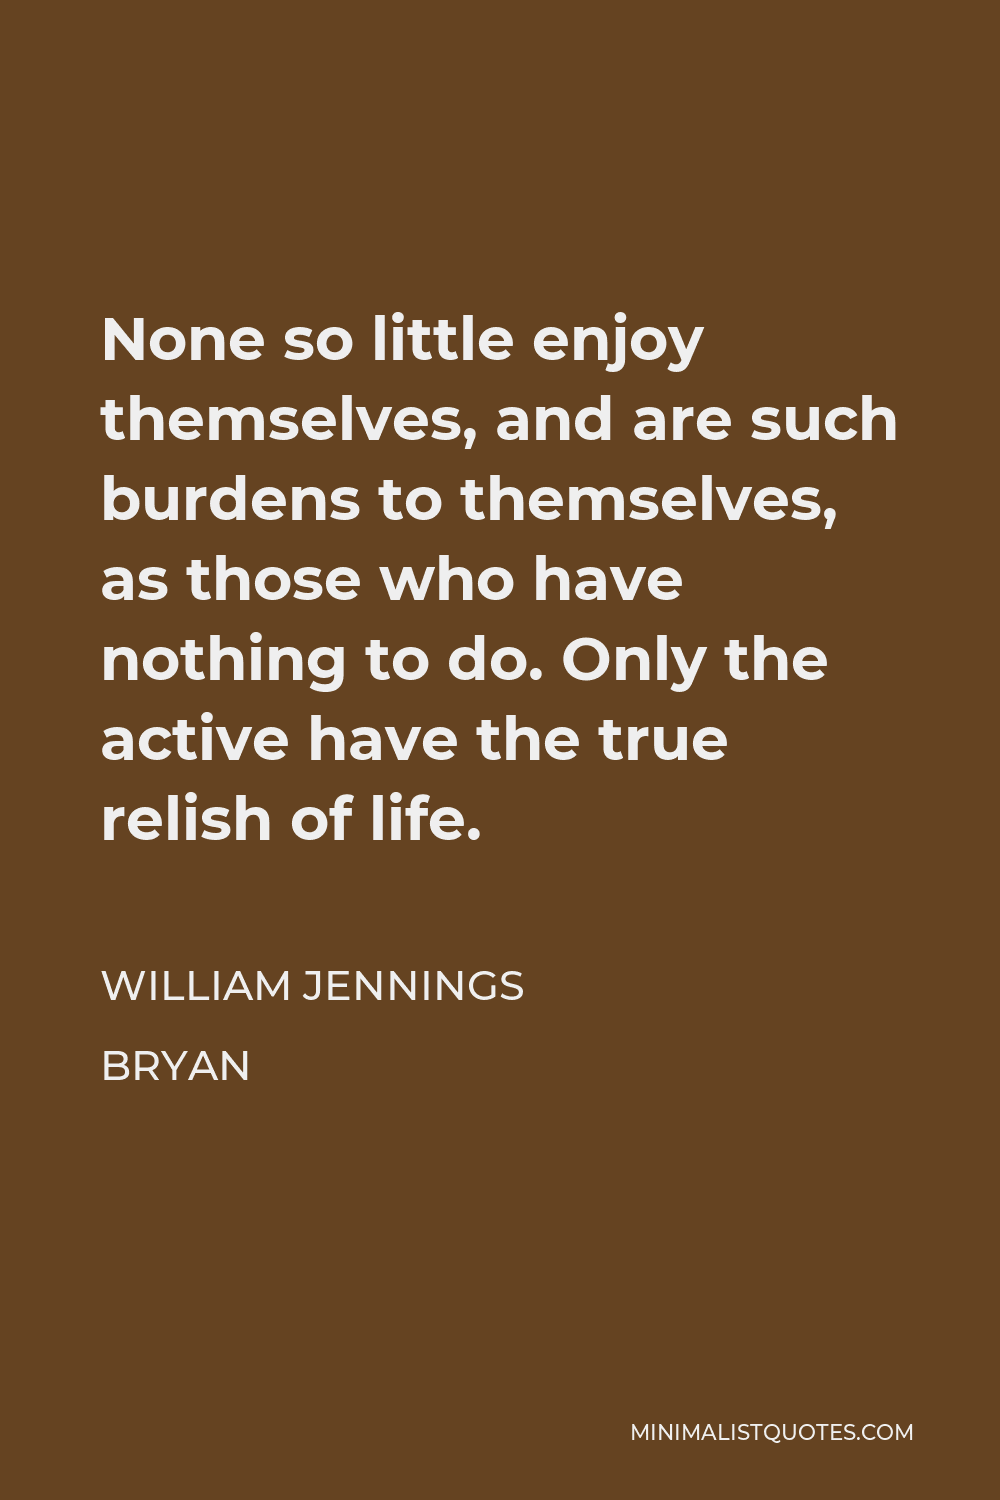 William Jennings Bryan Quote - None so little enjoy themselves, and are such burdens to themselves, as those who have nothing to do. Only the active have the true relish of life.